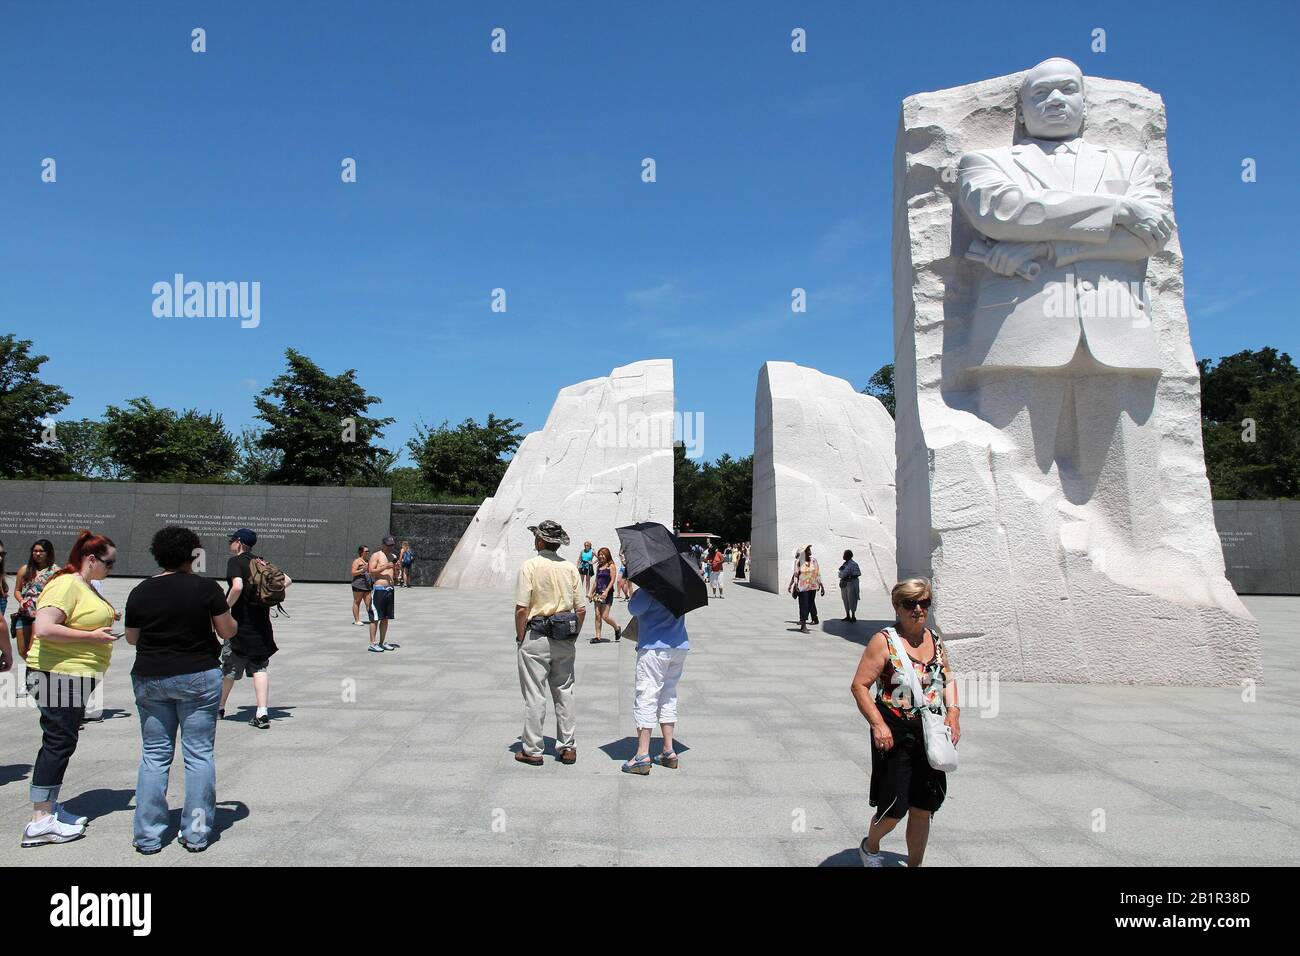 WASHINGTON DC, USA - JUNE 15, 2013: Tourists visit Martin Luther King memorial in Washington. 18.9 million tourists visited capital of the United Stat Stock Photo